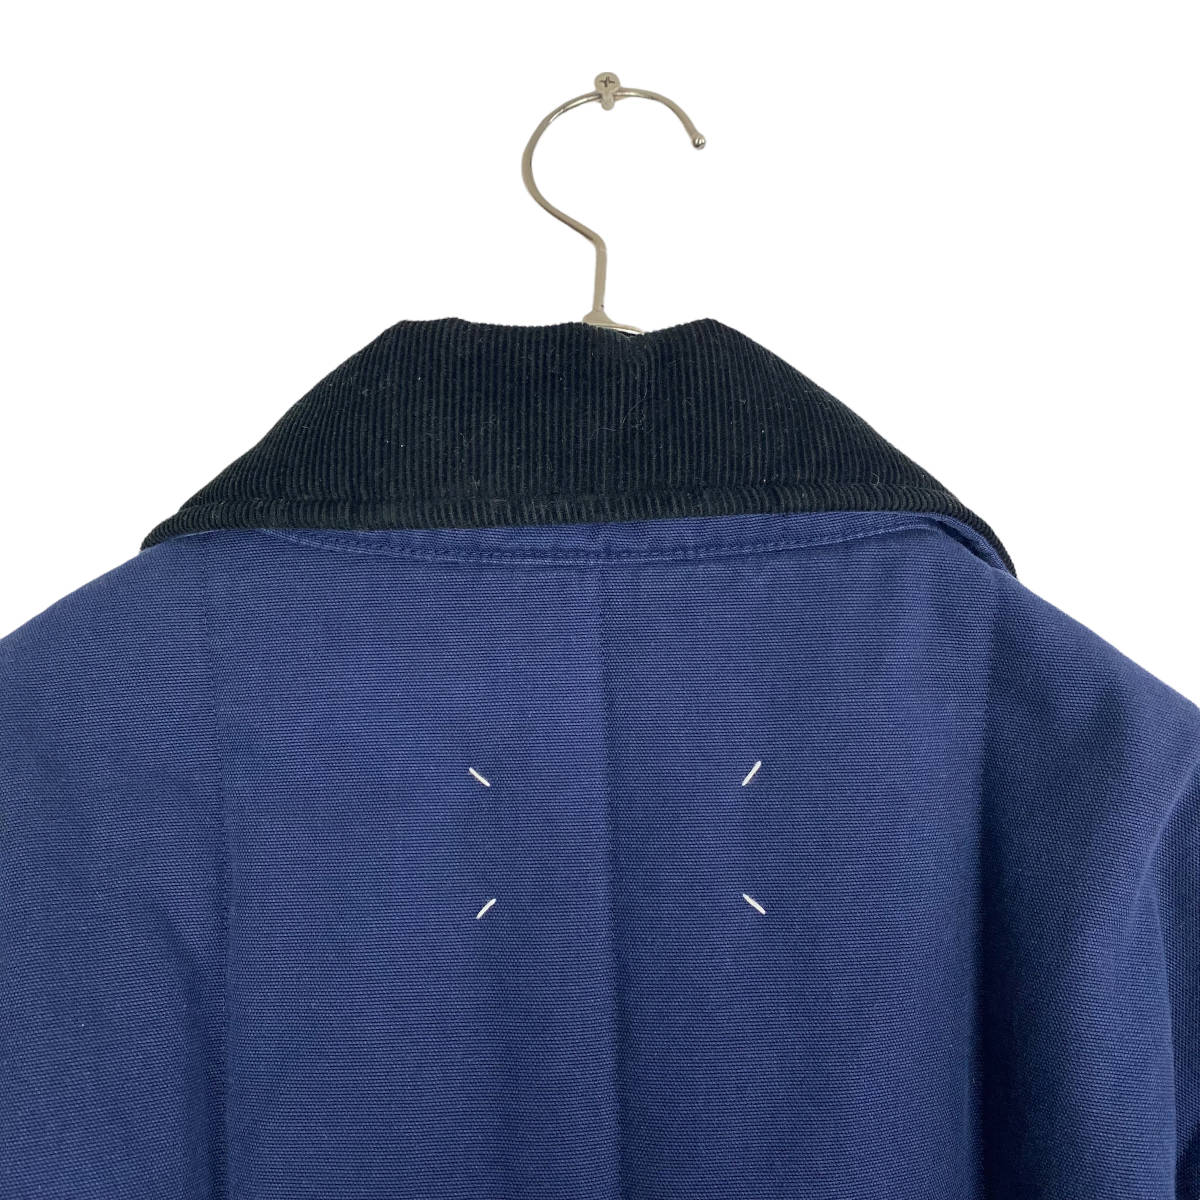 【20%OFF】Maison Margiela(メゾン マルジェラ) Quilted Work Jacket REPLICA 18ss(navy)